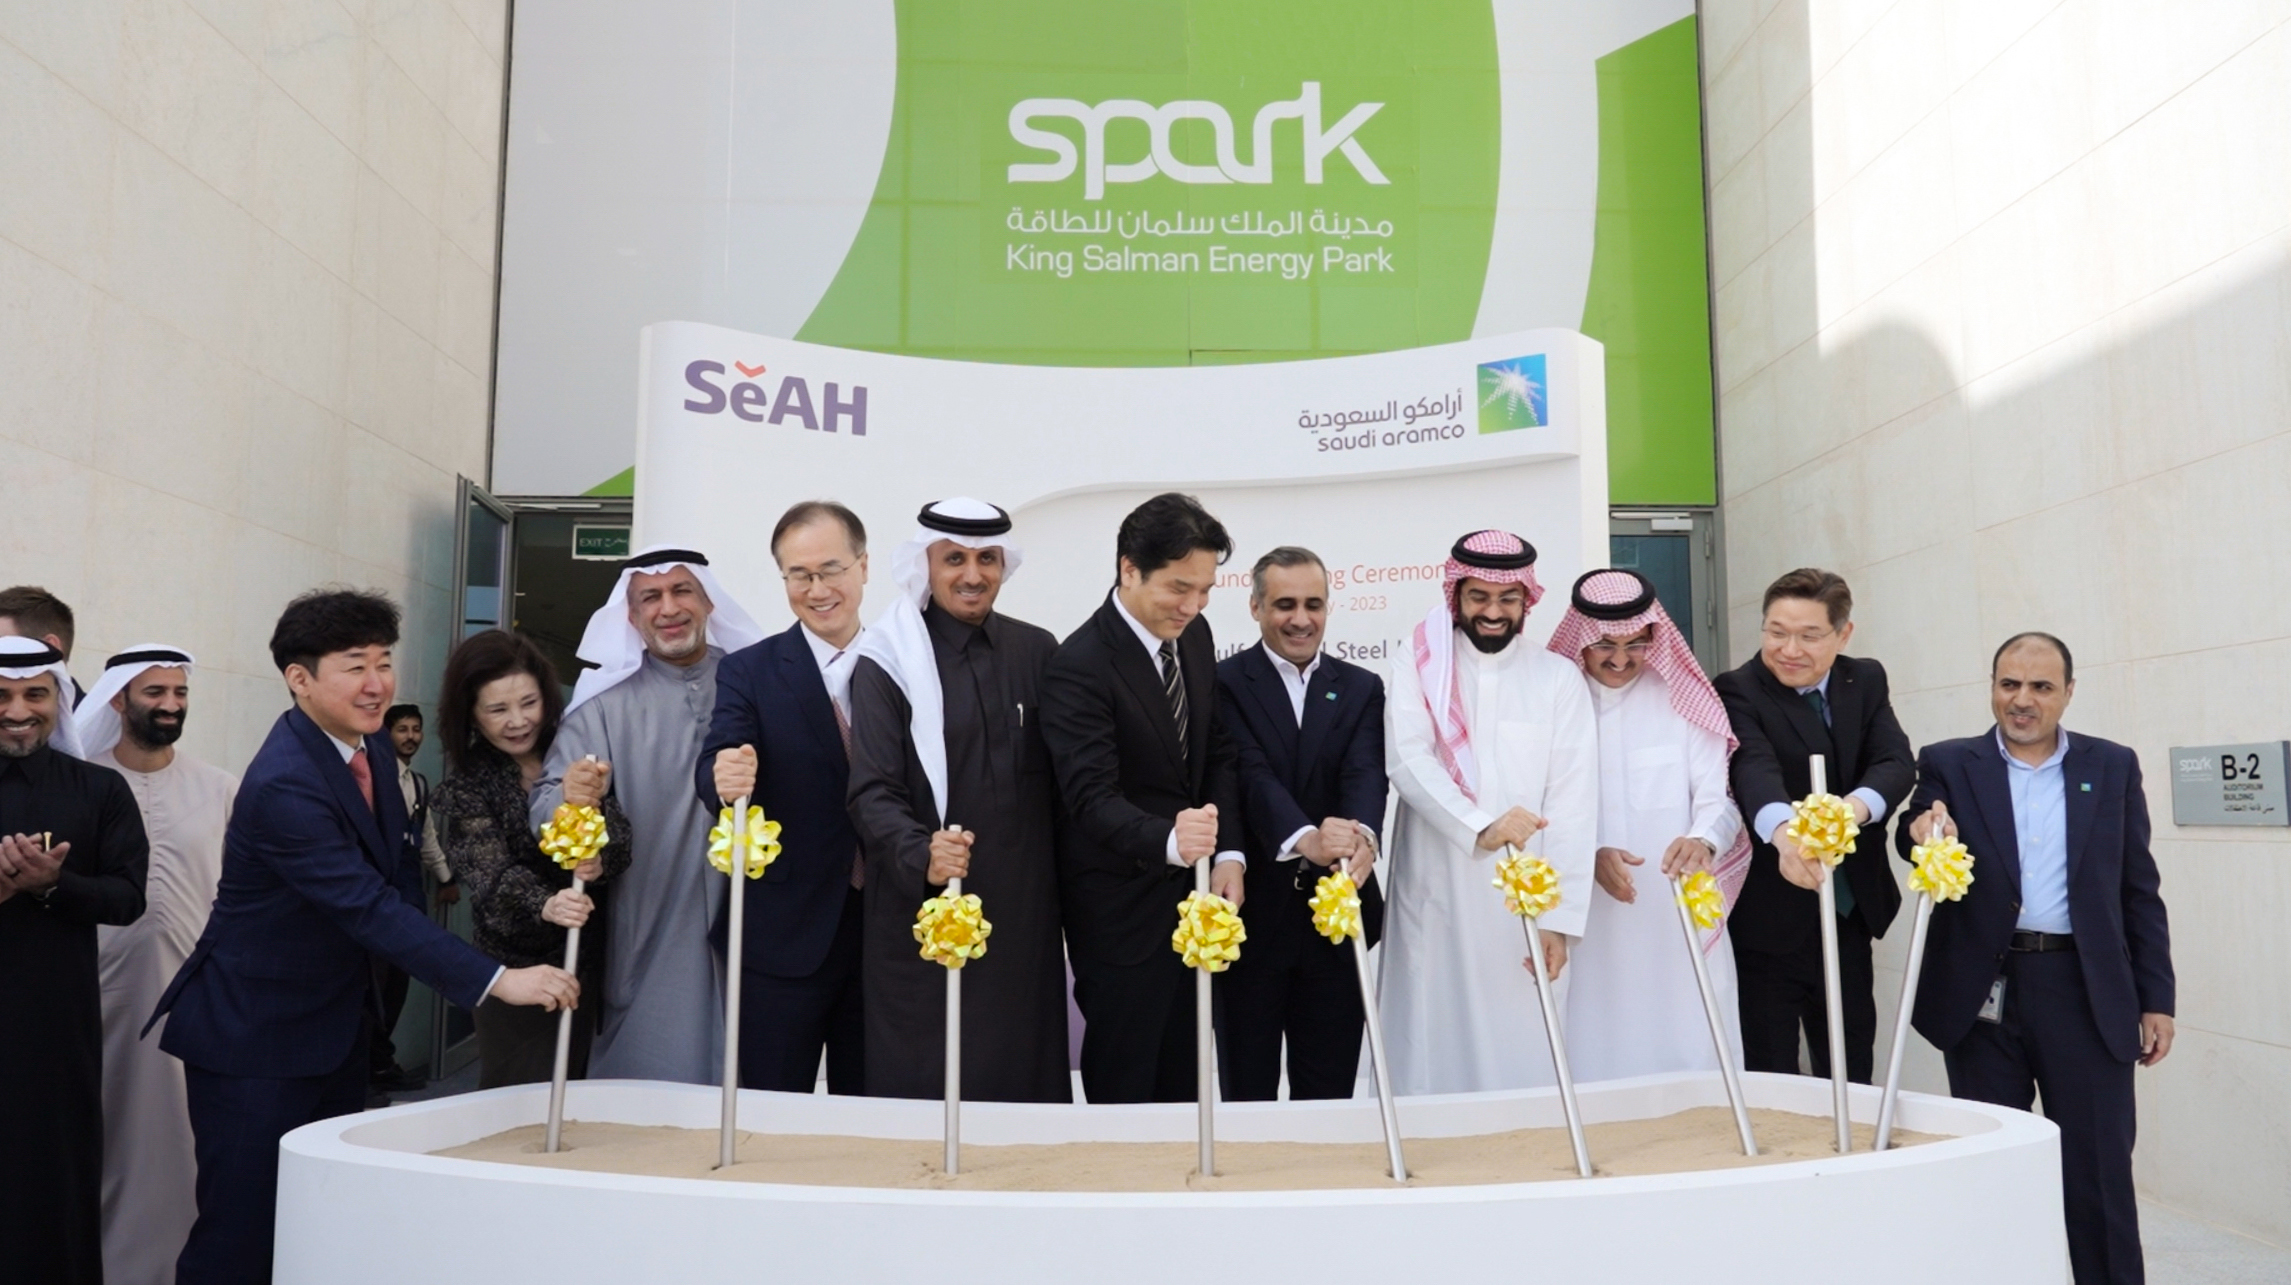 SeAH GSI, a joint venture by SeAH CSS and ARAMCO, held a groundbreaking ceremony for its seamless stainless steel pipe plant in Saudi Arabia, and the VIPs who attended the ceremony posed for a picture.